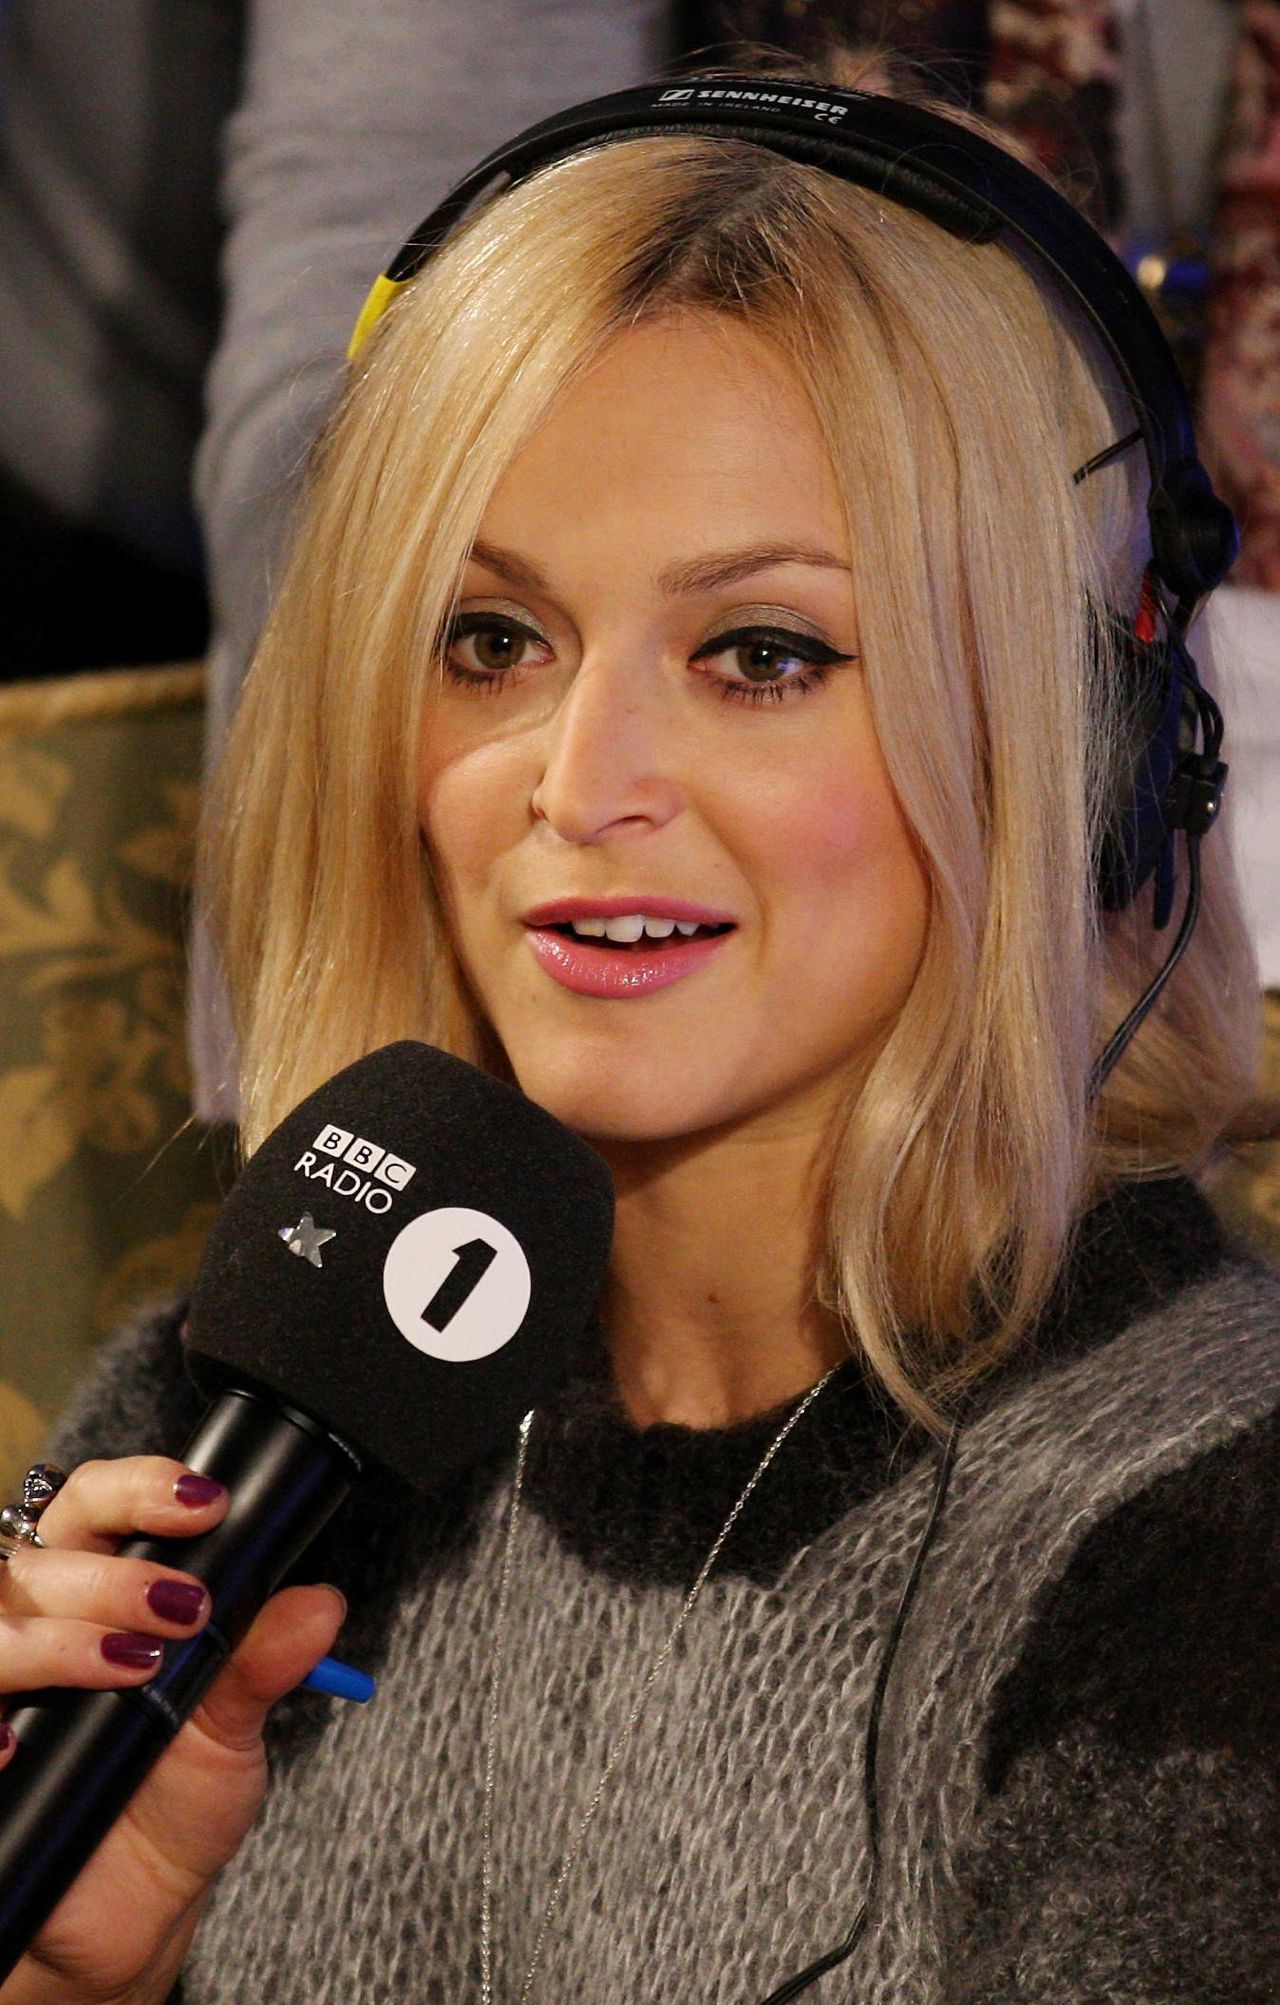 Fearne left Radio 1 in 2015 after 10 years with the station